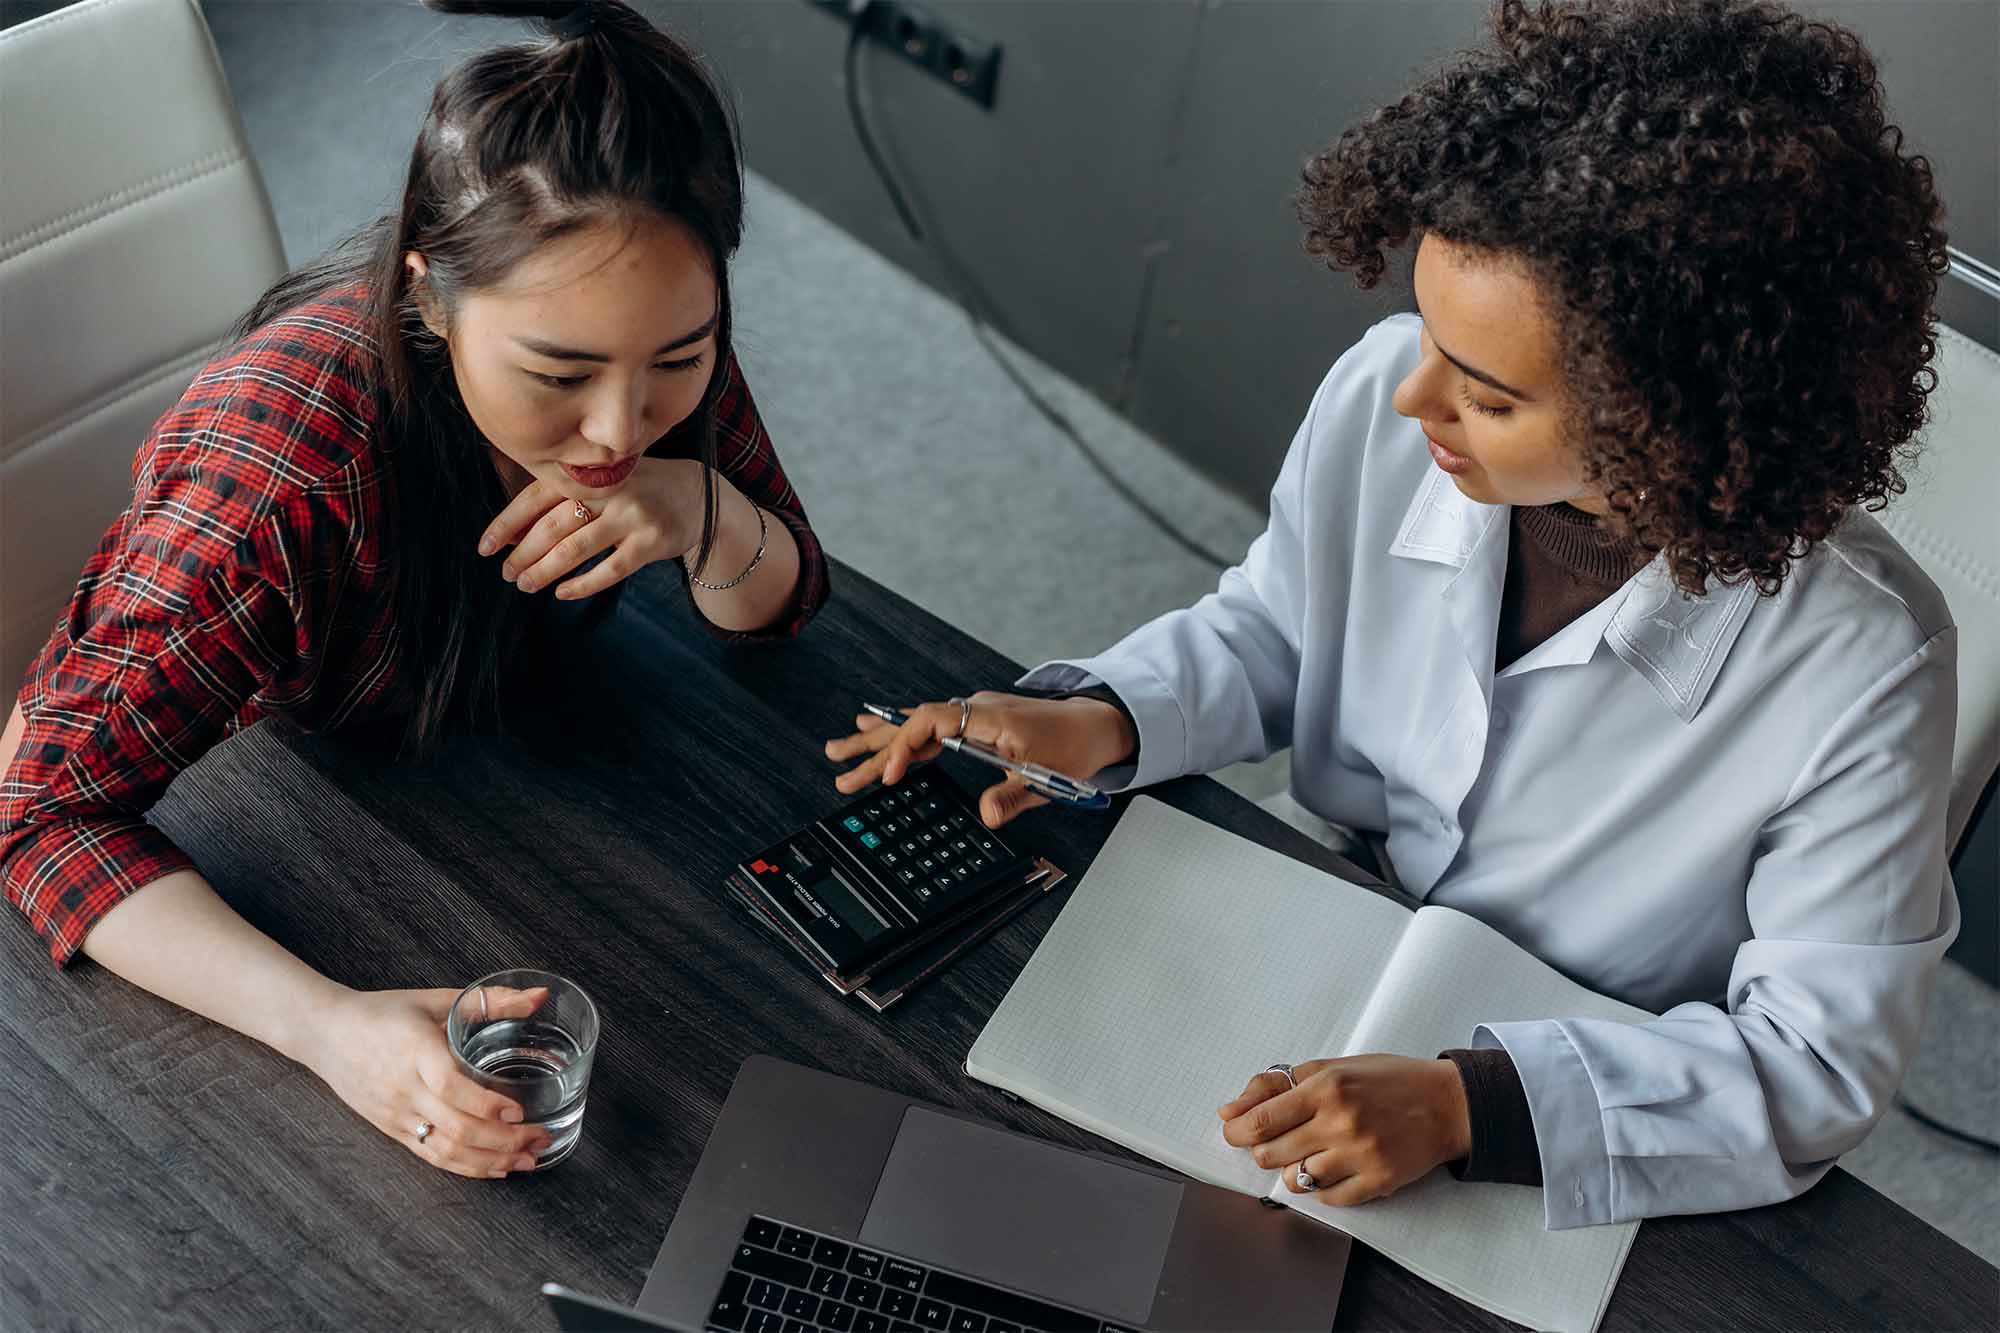 Two women discussing business with their productivity devices on hand